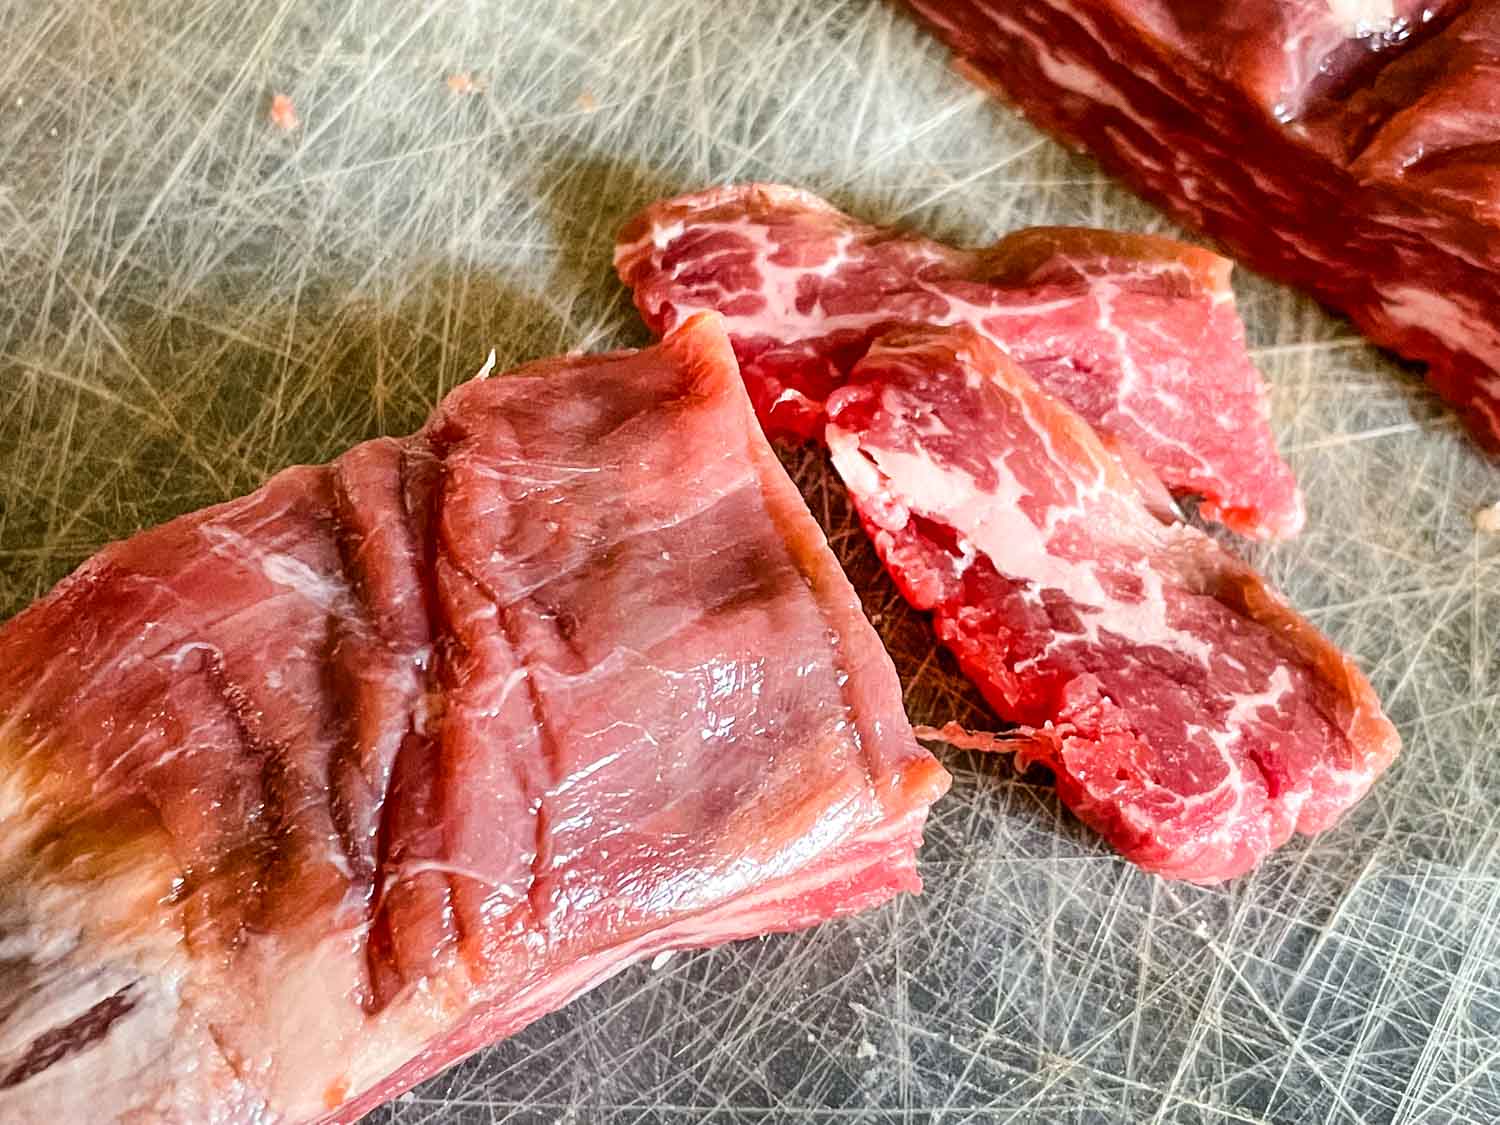 Cutting the sections of beef into slices